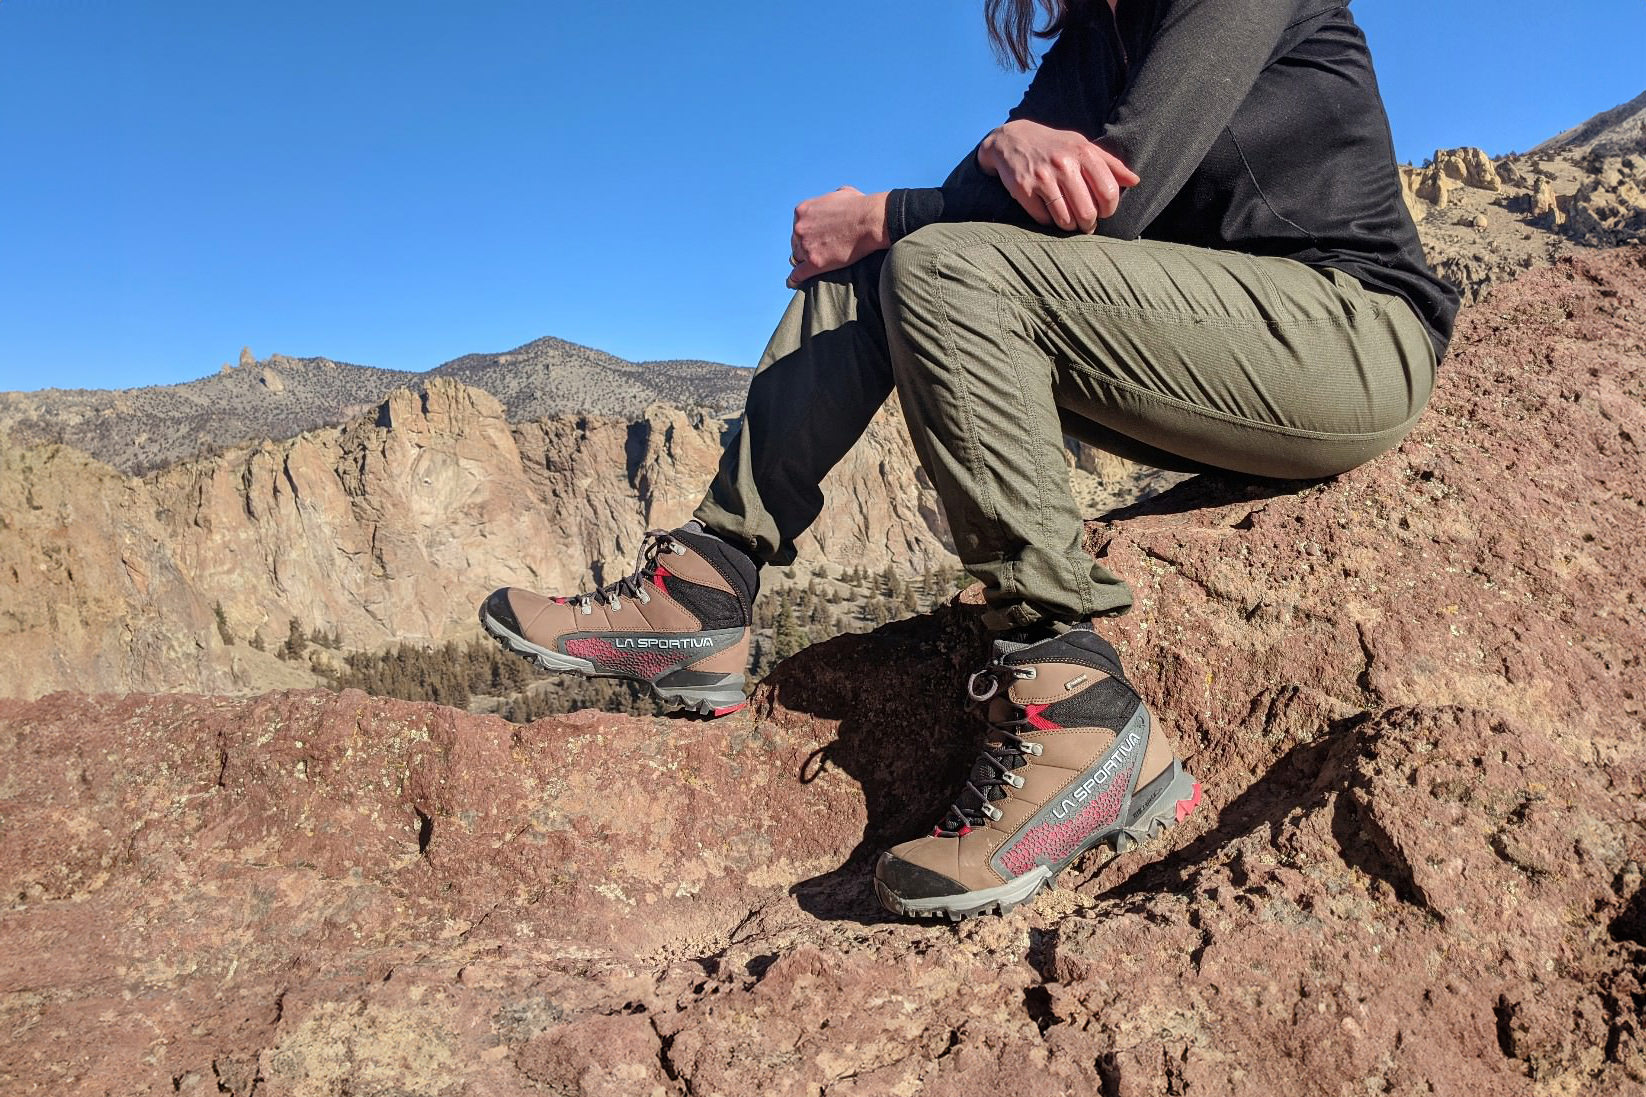 Waist-down view of a hiker taking a rest break by sitting on some rocks in the La Sportiva Nucleo High II GTX boots with rocky, high-desert clifs in the background.